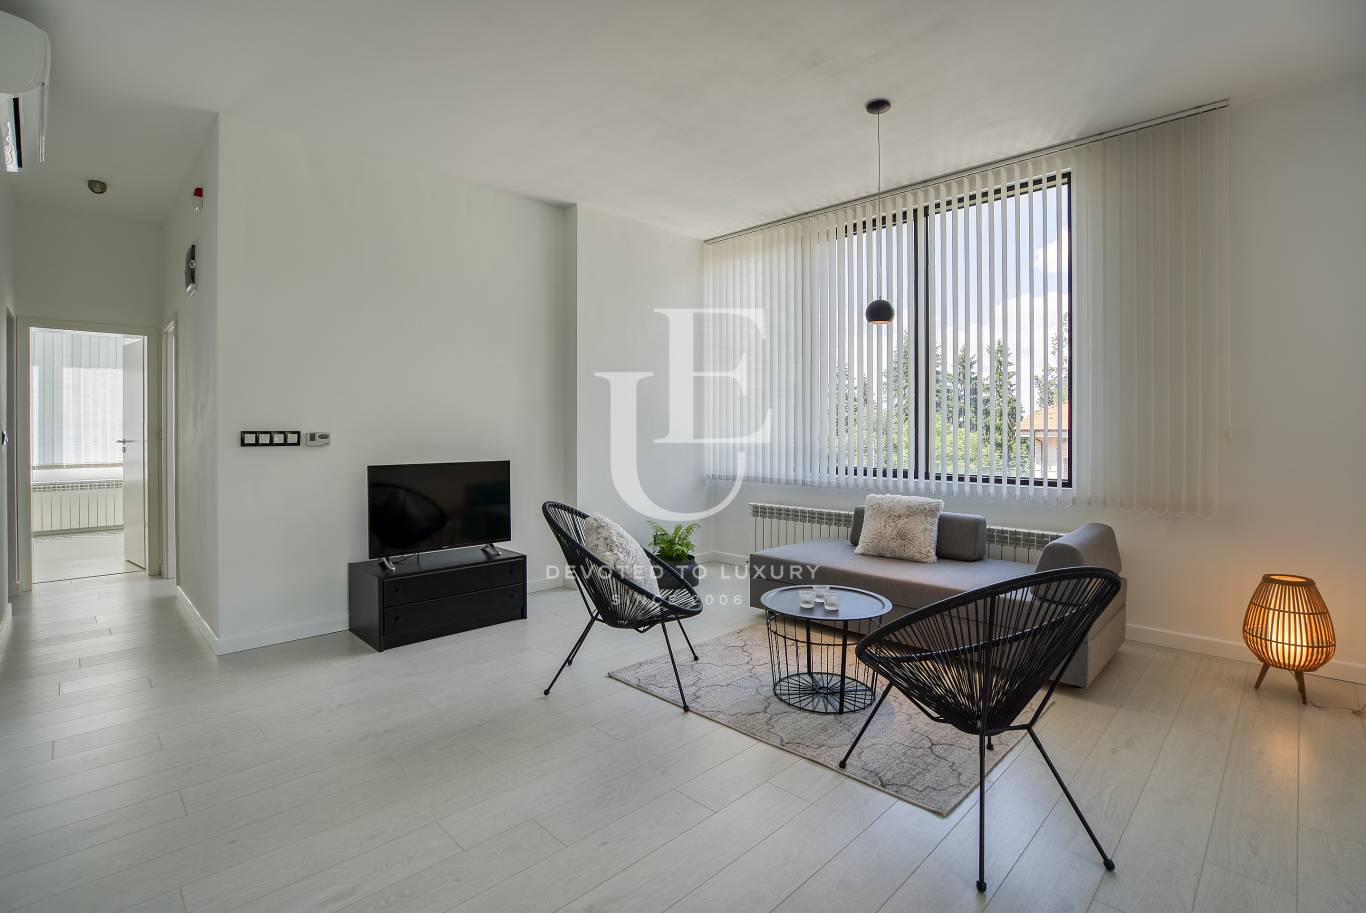 Apartment for rent in Sofia, Boyana with listing ID: N17785 - image 3